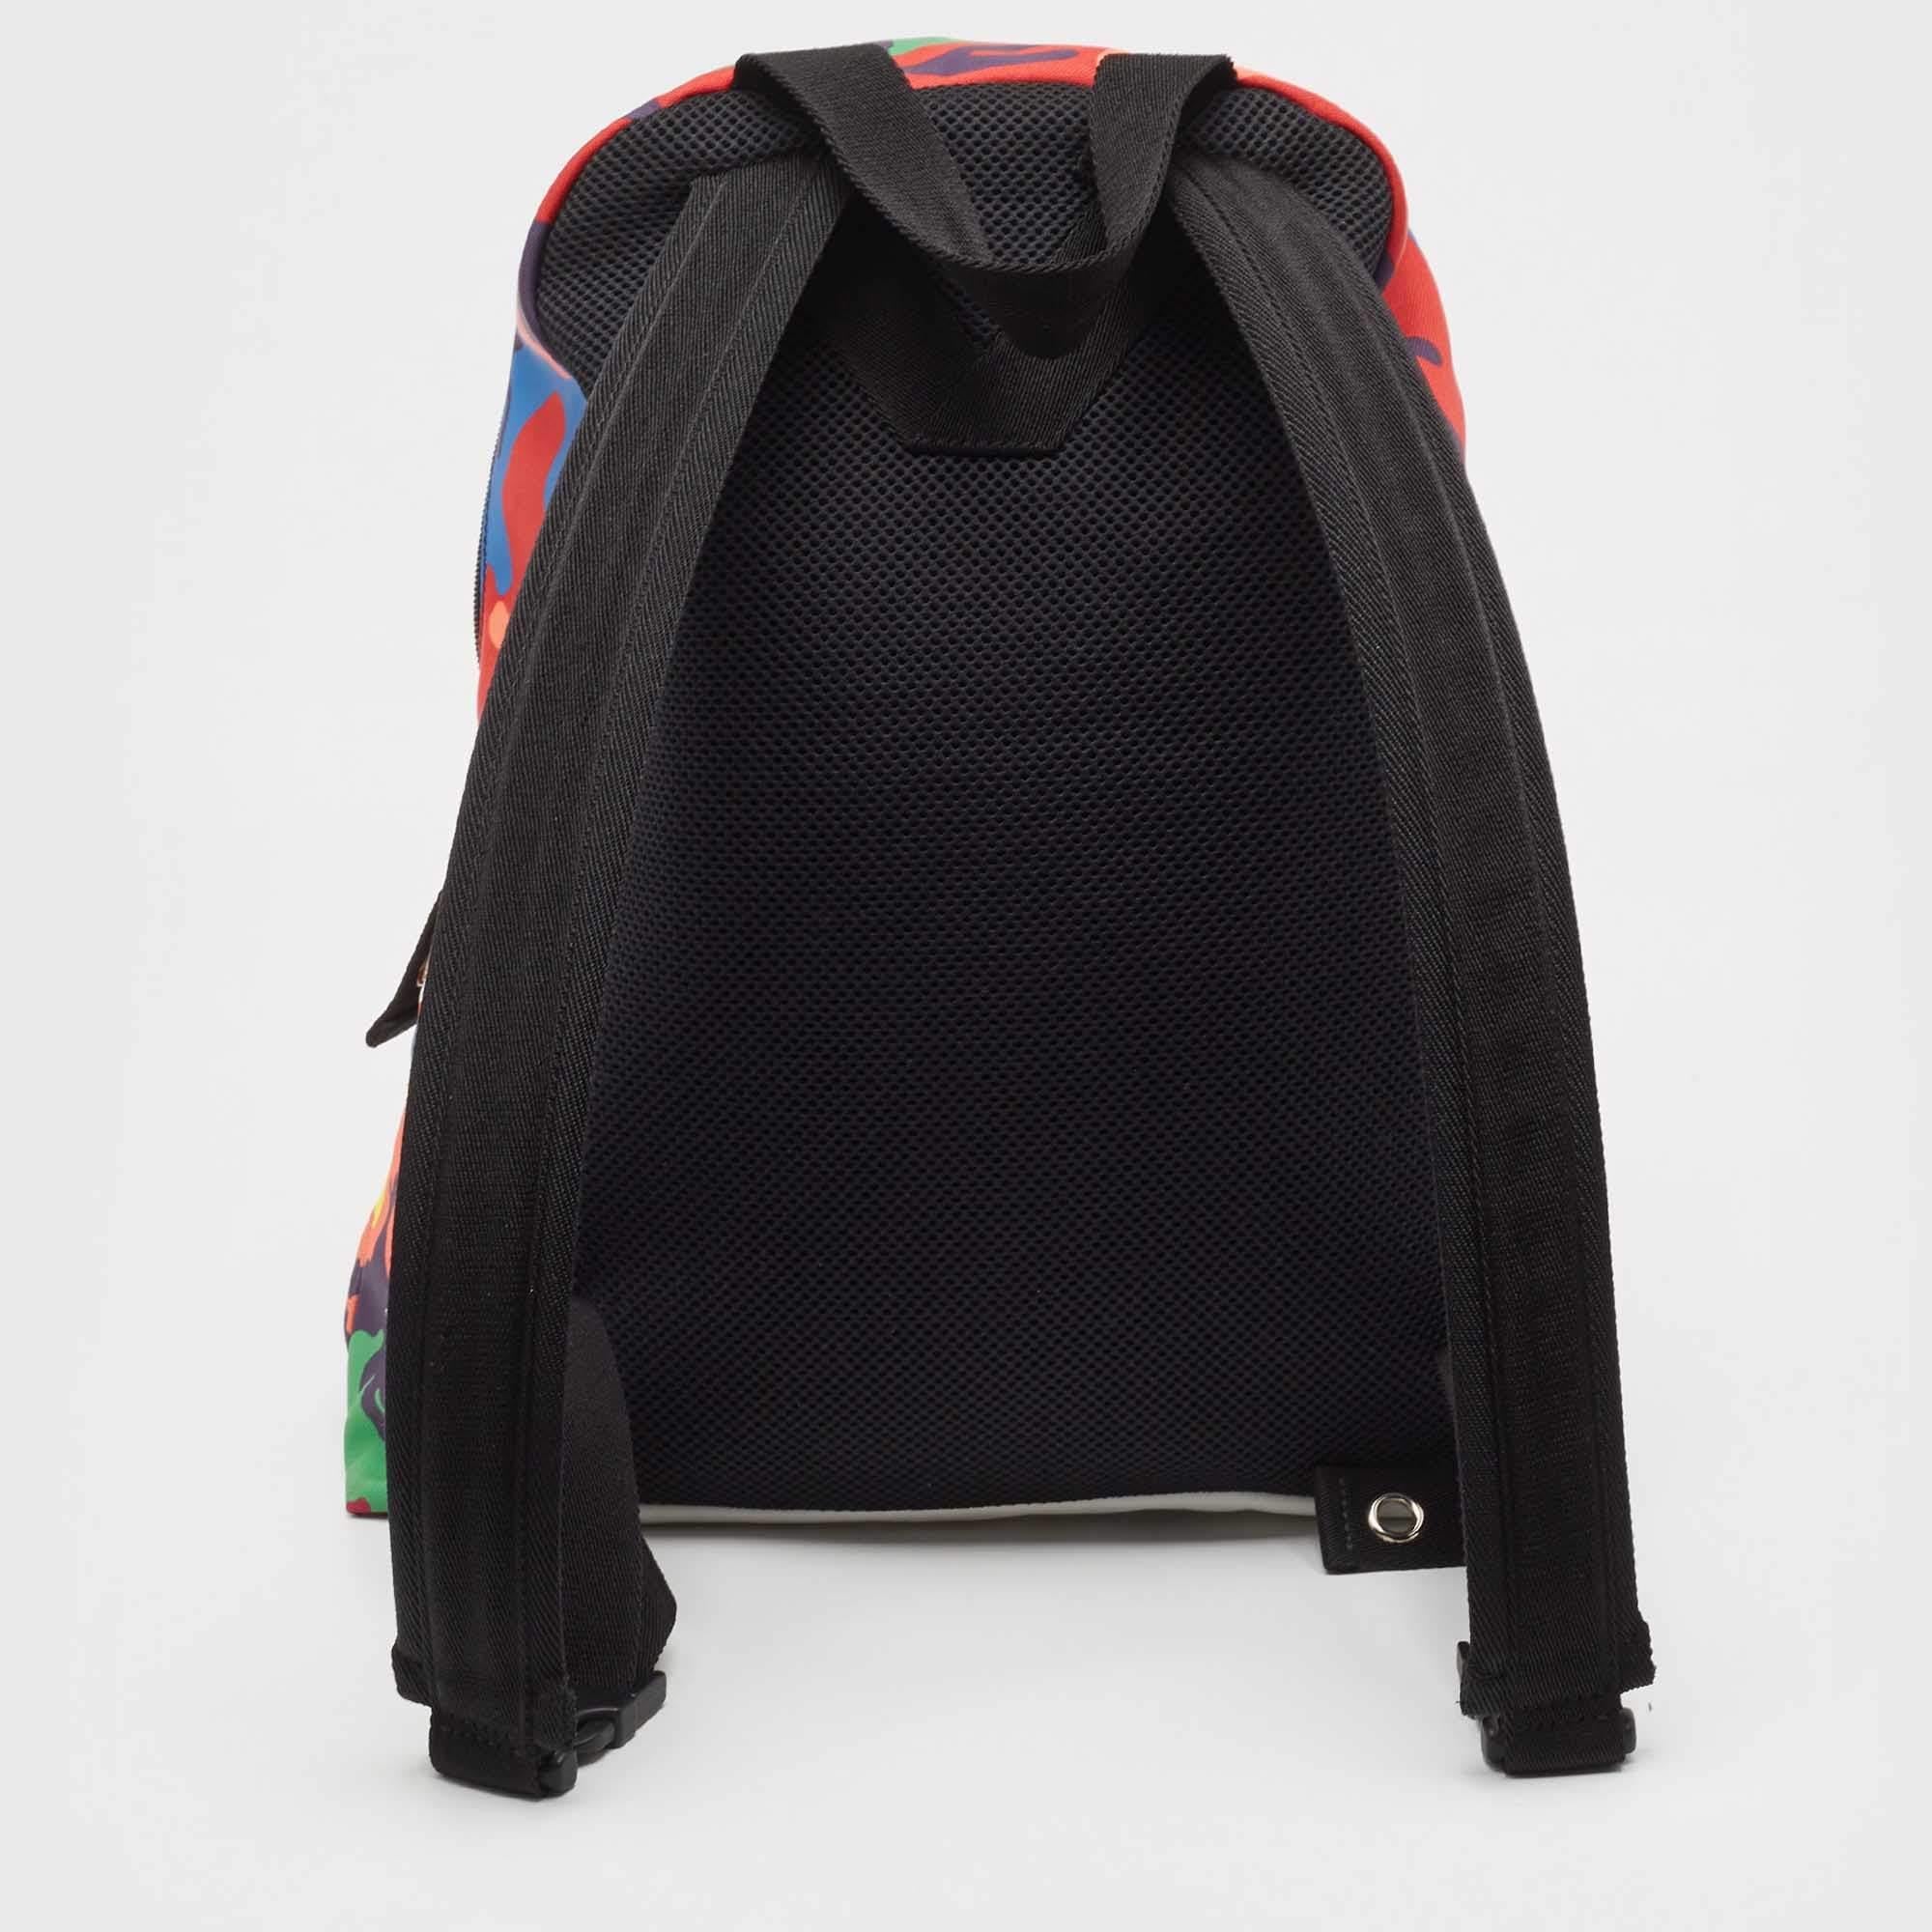 This Valentino practical and fashionable backpack will come in handy for daily use or as a style statement. It is smartly designed with a spacious interior for your belongings. Two shoulder straps make it ready to be yours.

Includes: Original